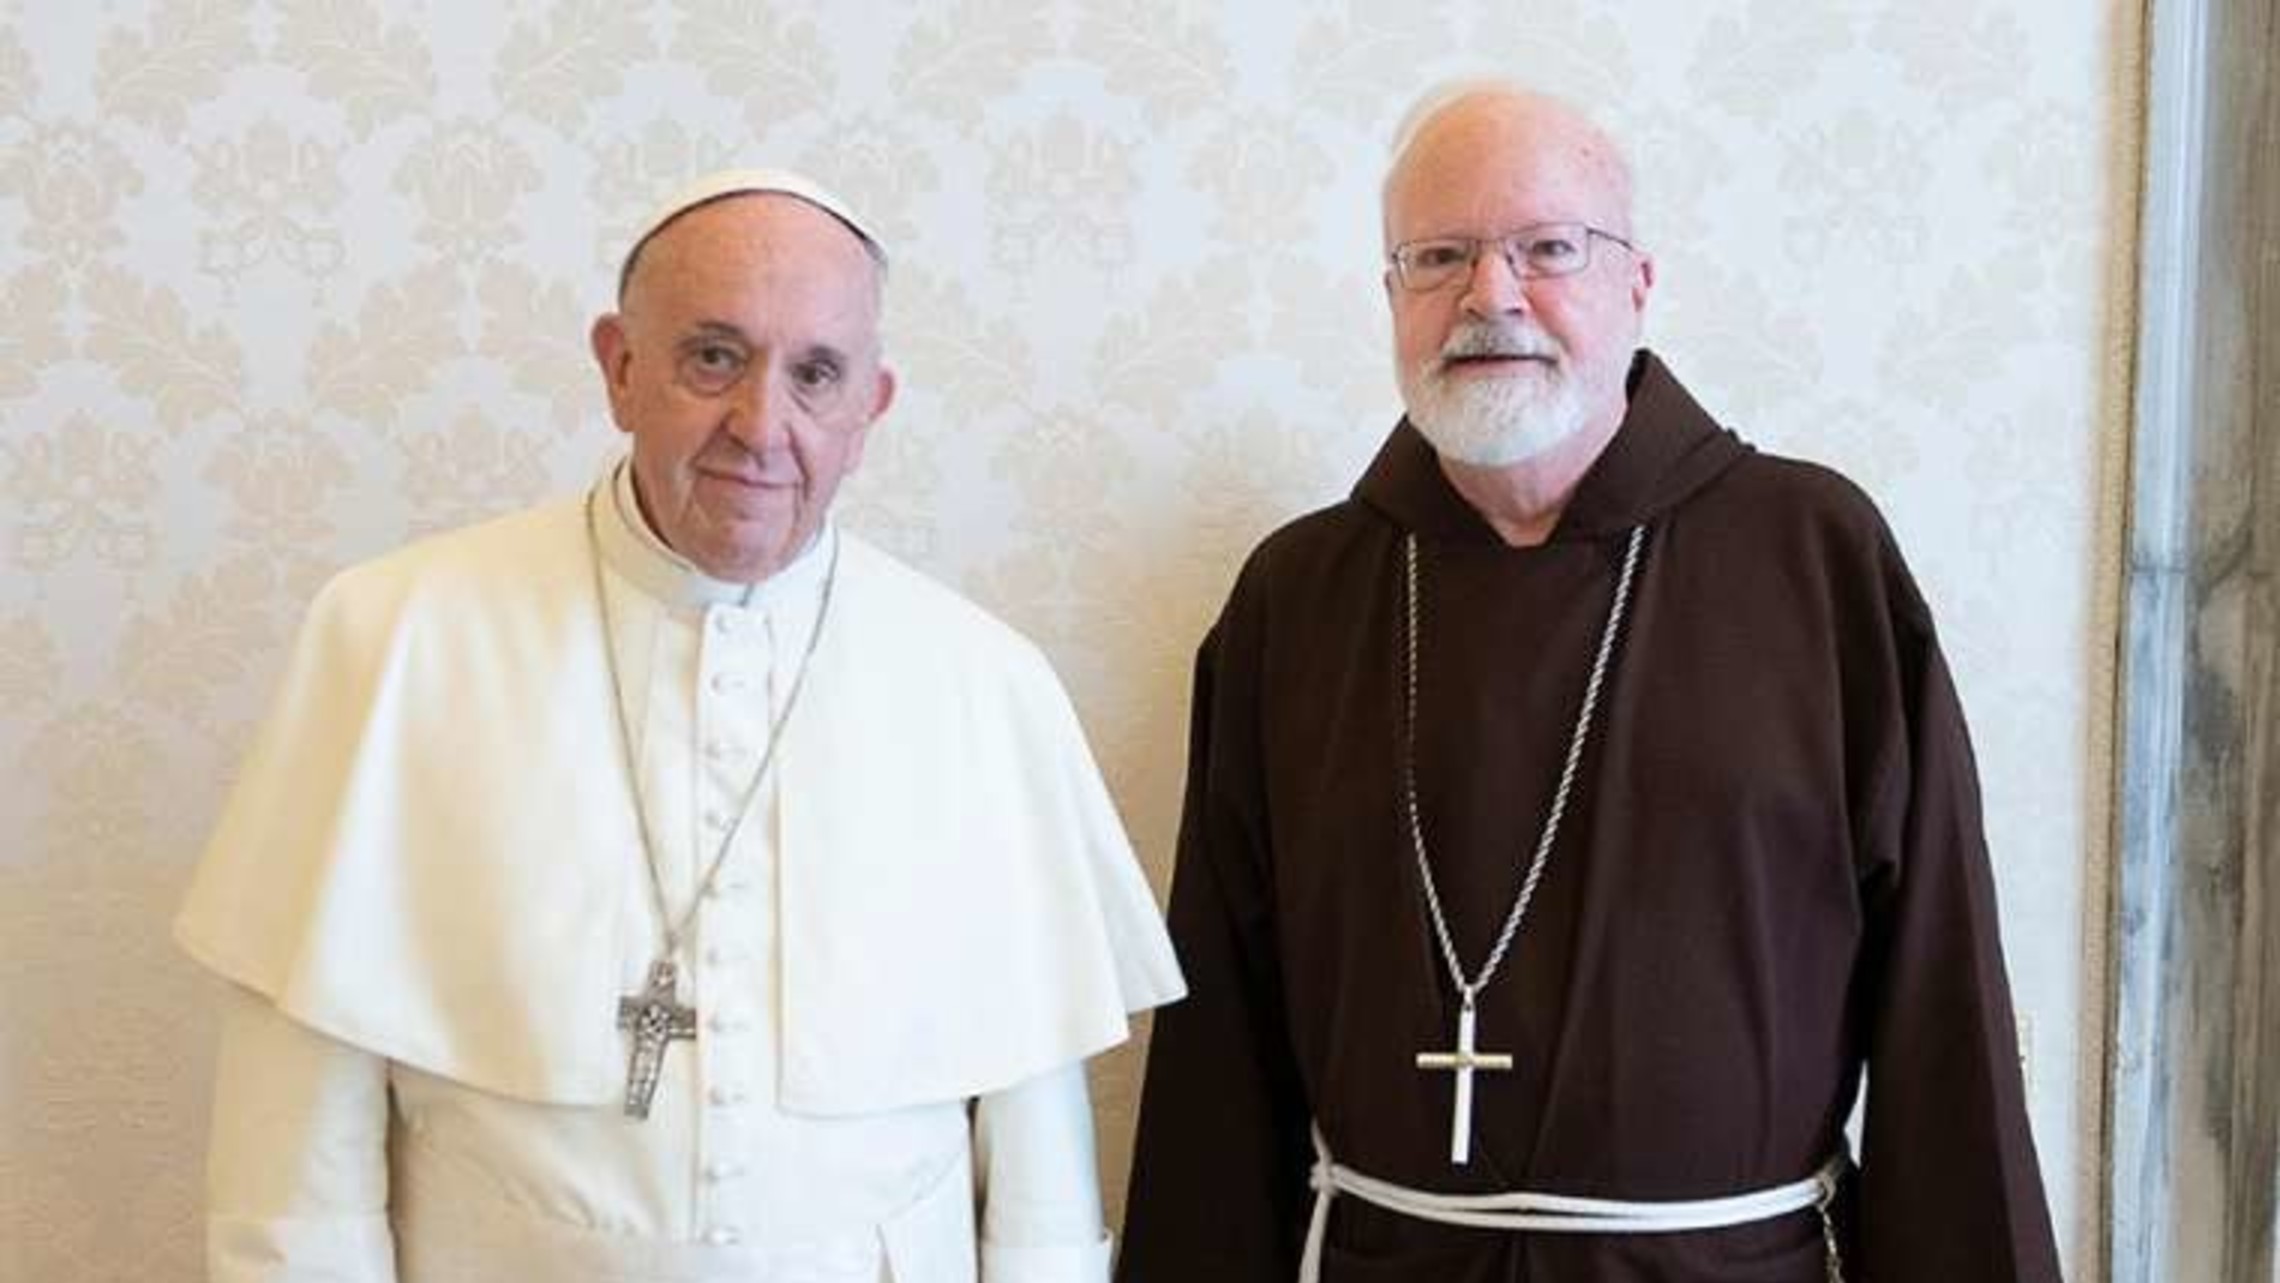 Pope Francis With Cardinal Sean Patrick Omalley Ofm Cap In Vatican City On April 19 2018 Credit Vatican Media Cna